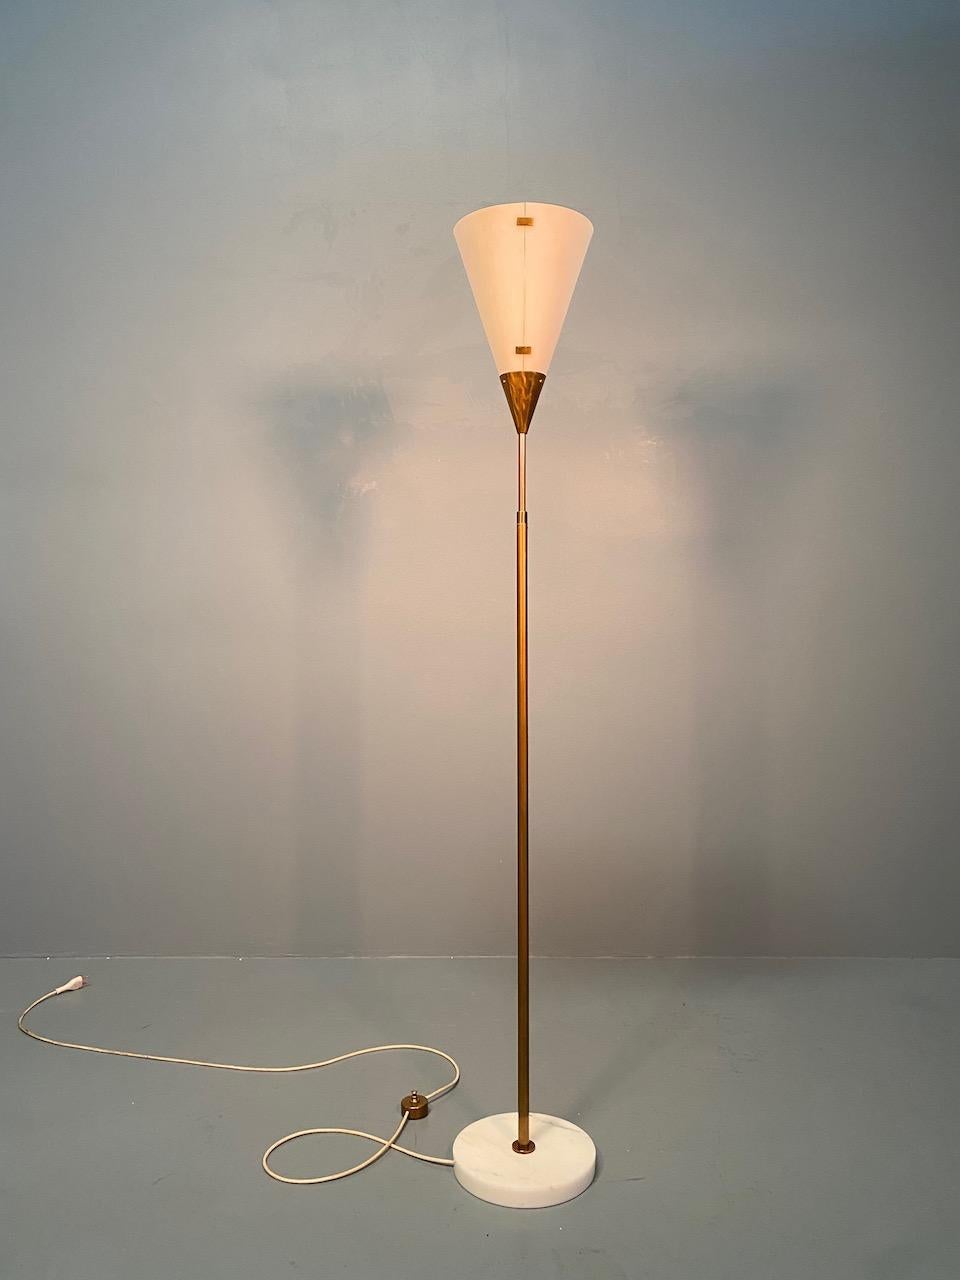 Stunning Minimalist adjustable floor lamp model 339 designed by Giuseppe Ostuni and manufactured by Oluce, Italy 1950. The floor lamp has a round Carrara marble base and a brass extendable stem. The shade is made of white perspex with brass closing